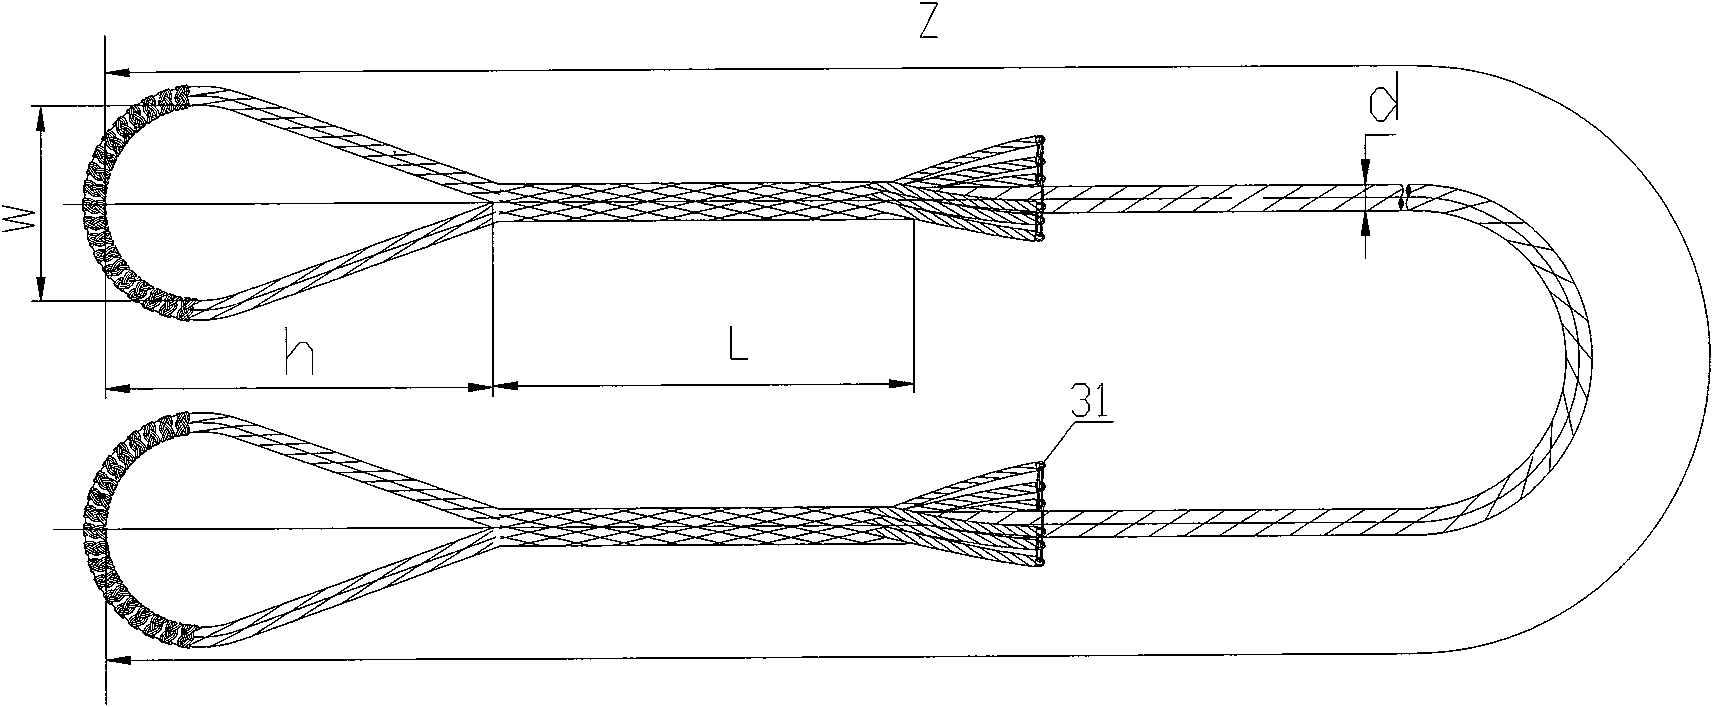 Method for splicing high-bearing-capacity steel cable